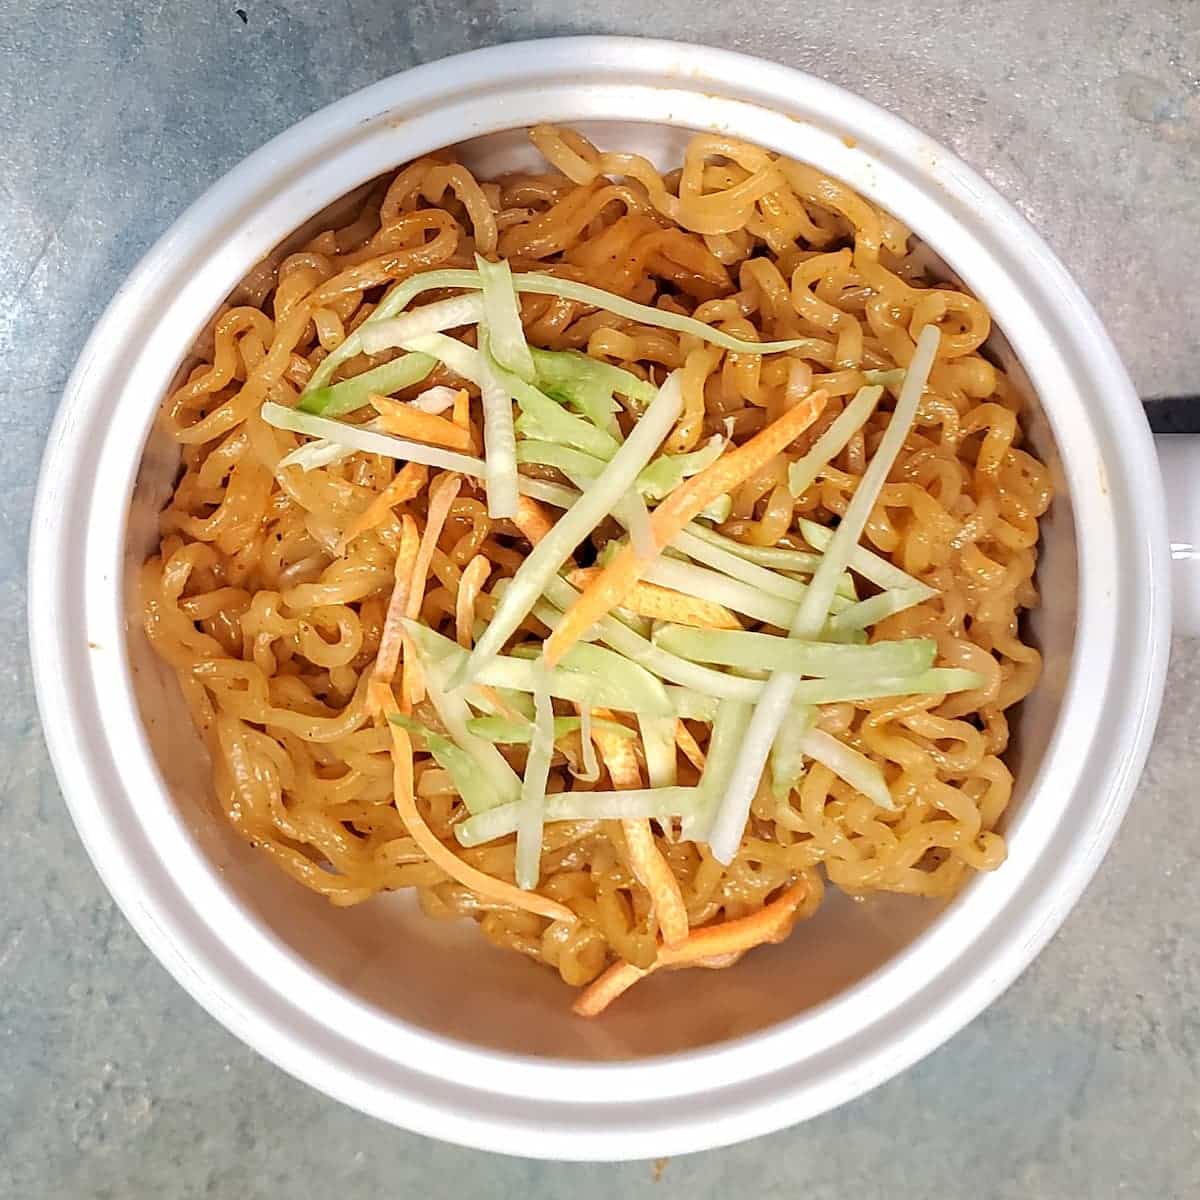 easy vegan ramen sauce on ramen noodles with carrots and broccoli strips. Recipe from cleveland cooking.